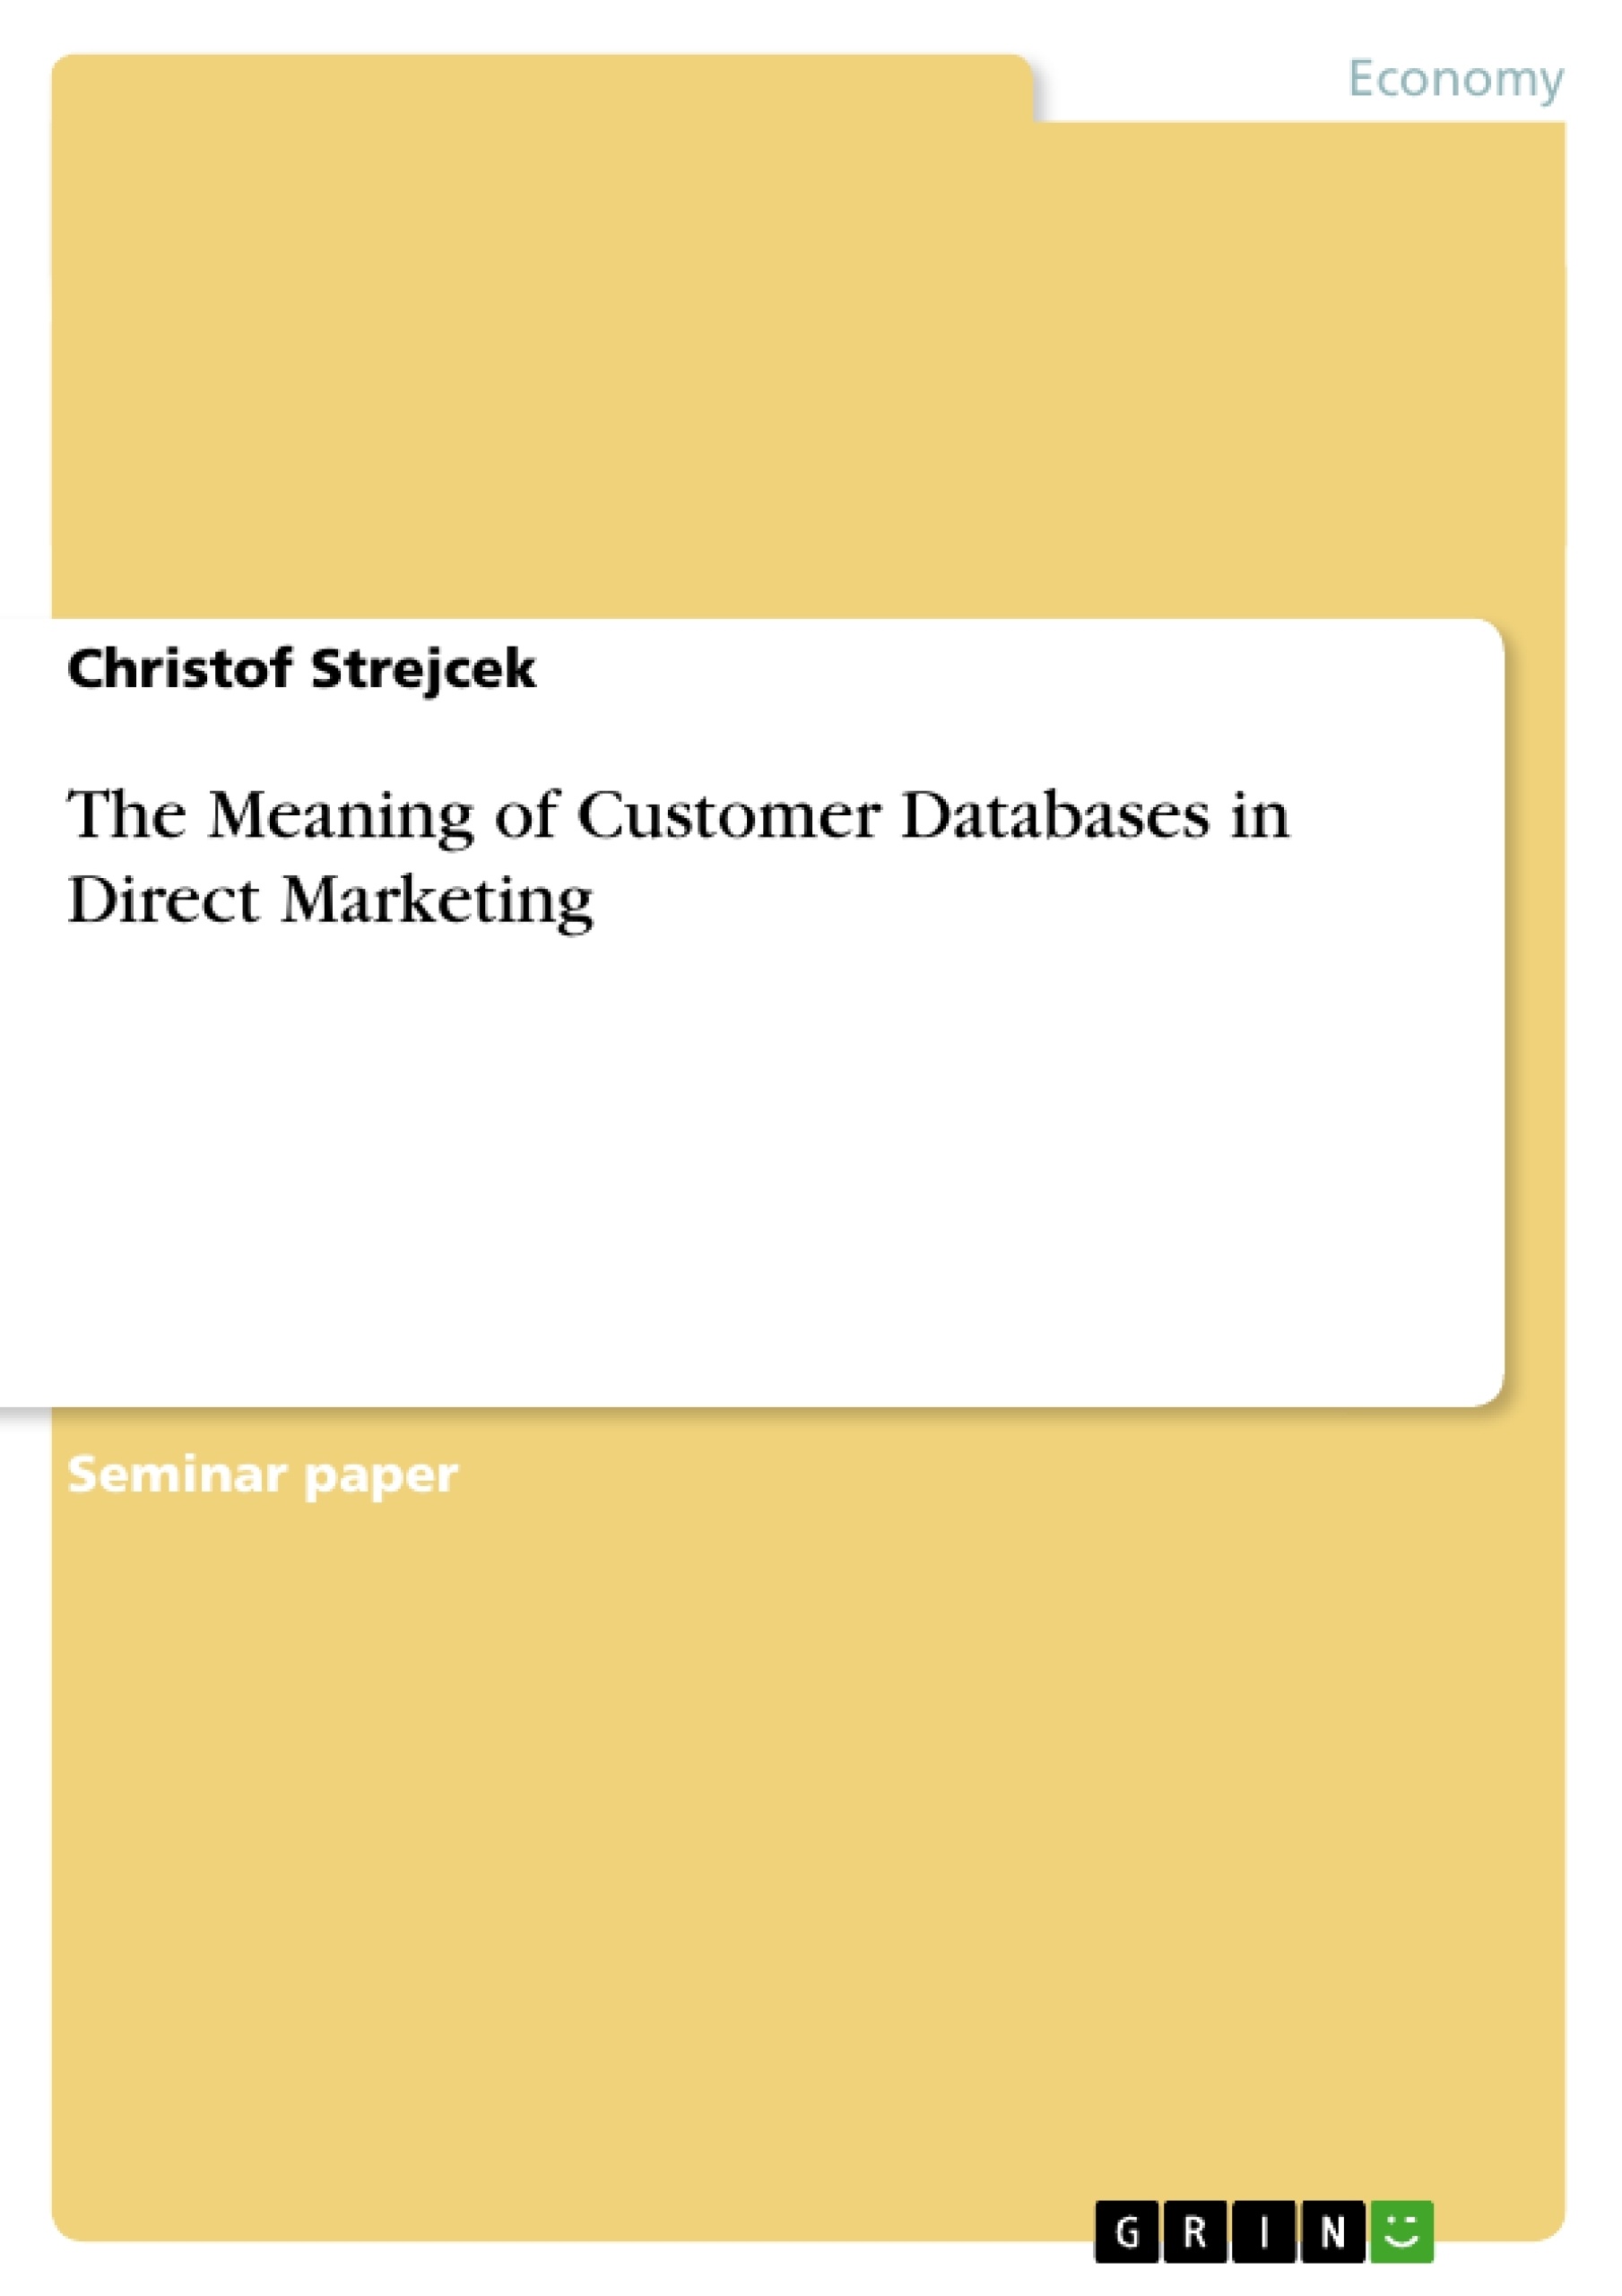 Title: The Meaning of Customer Databases in Direct Marketing